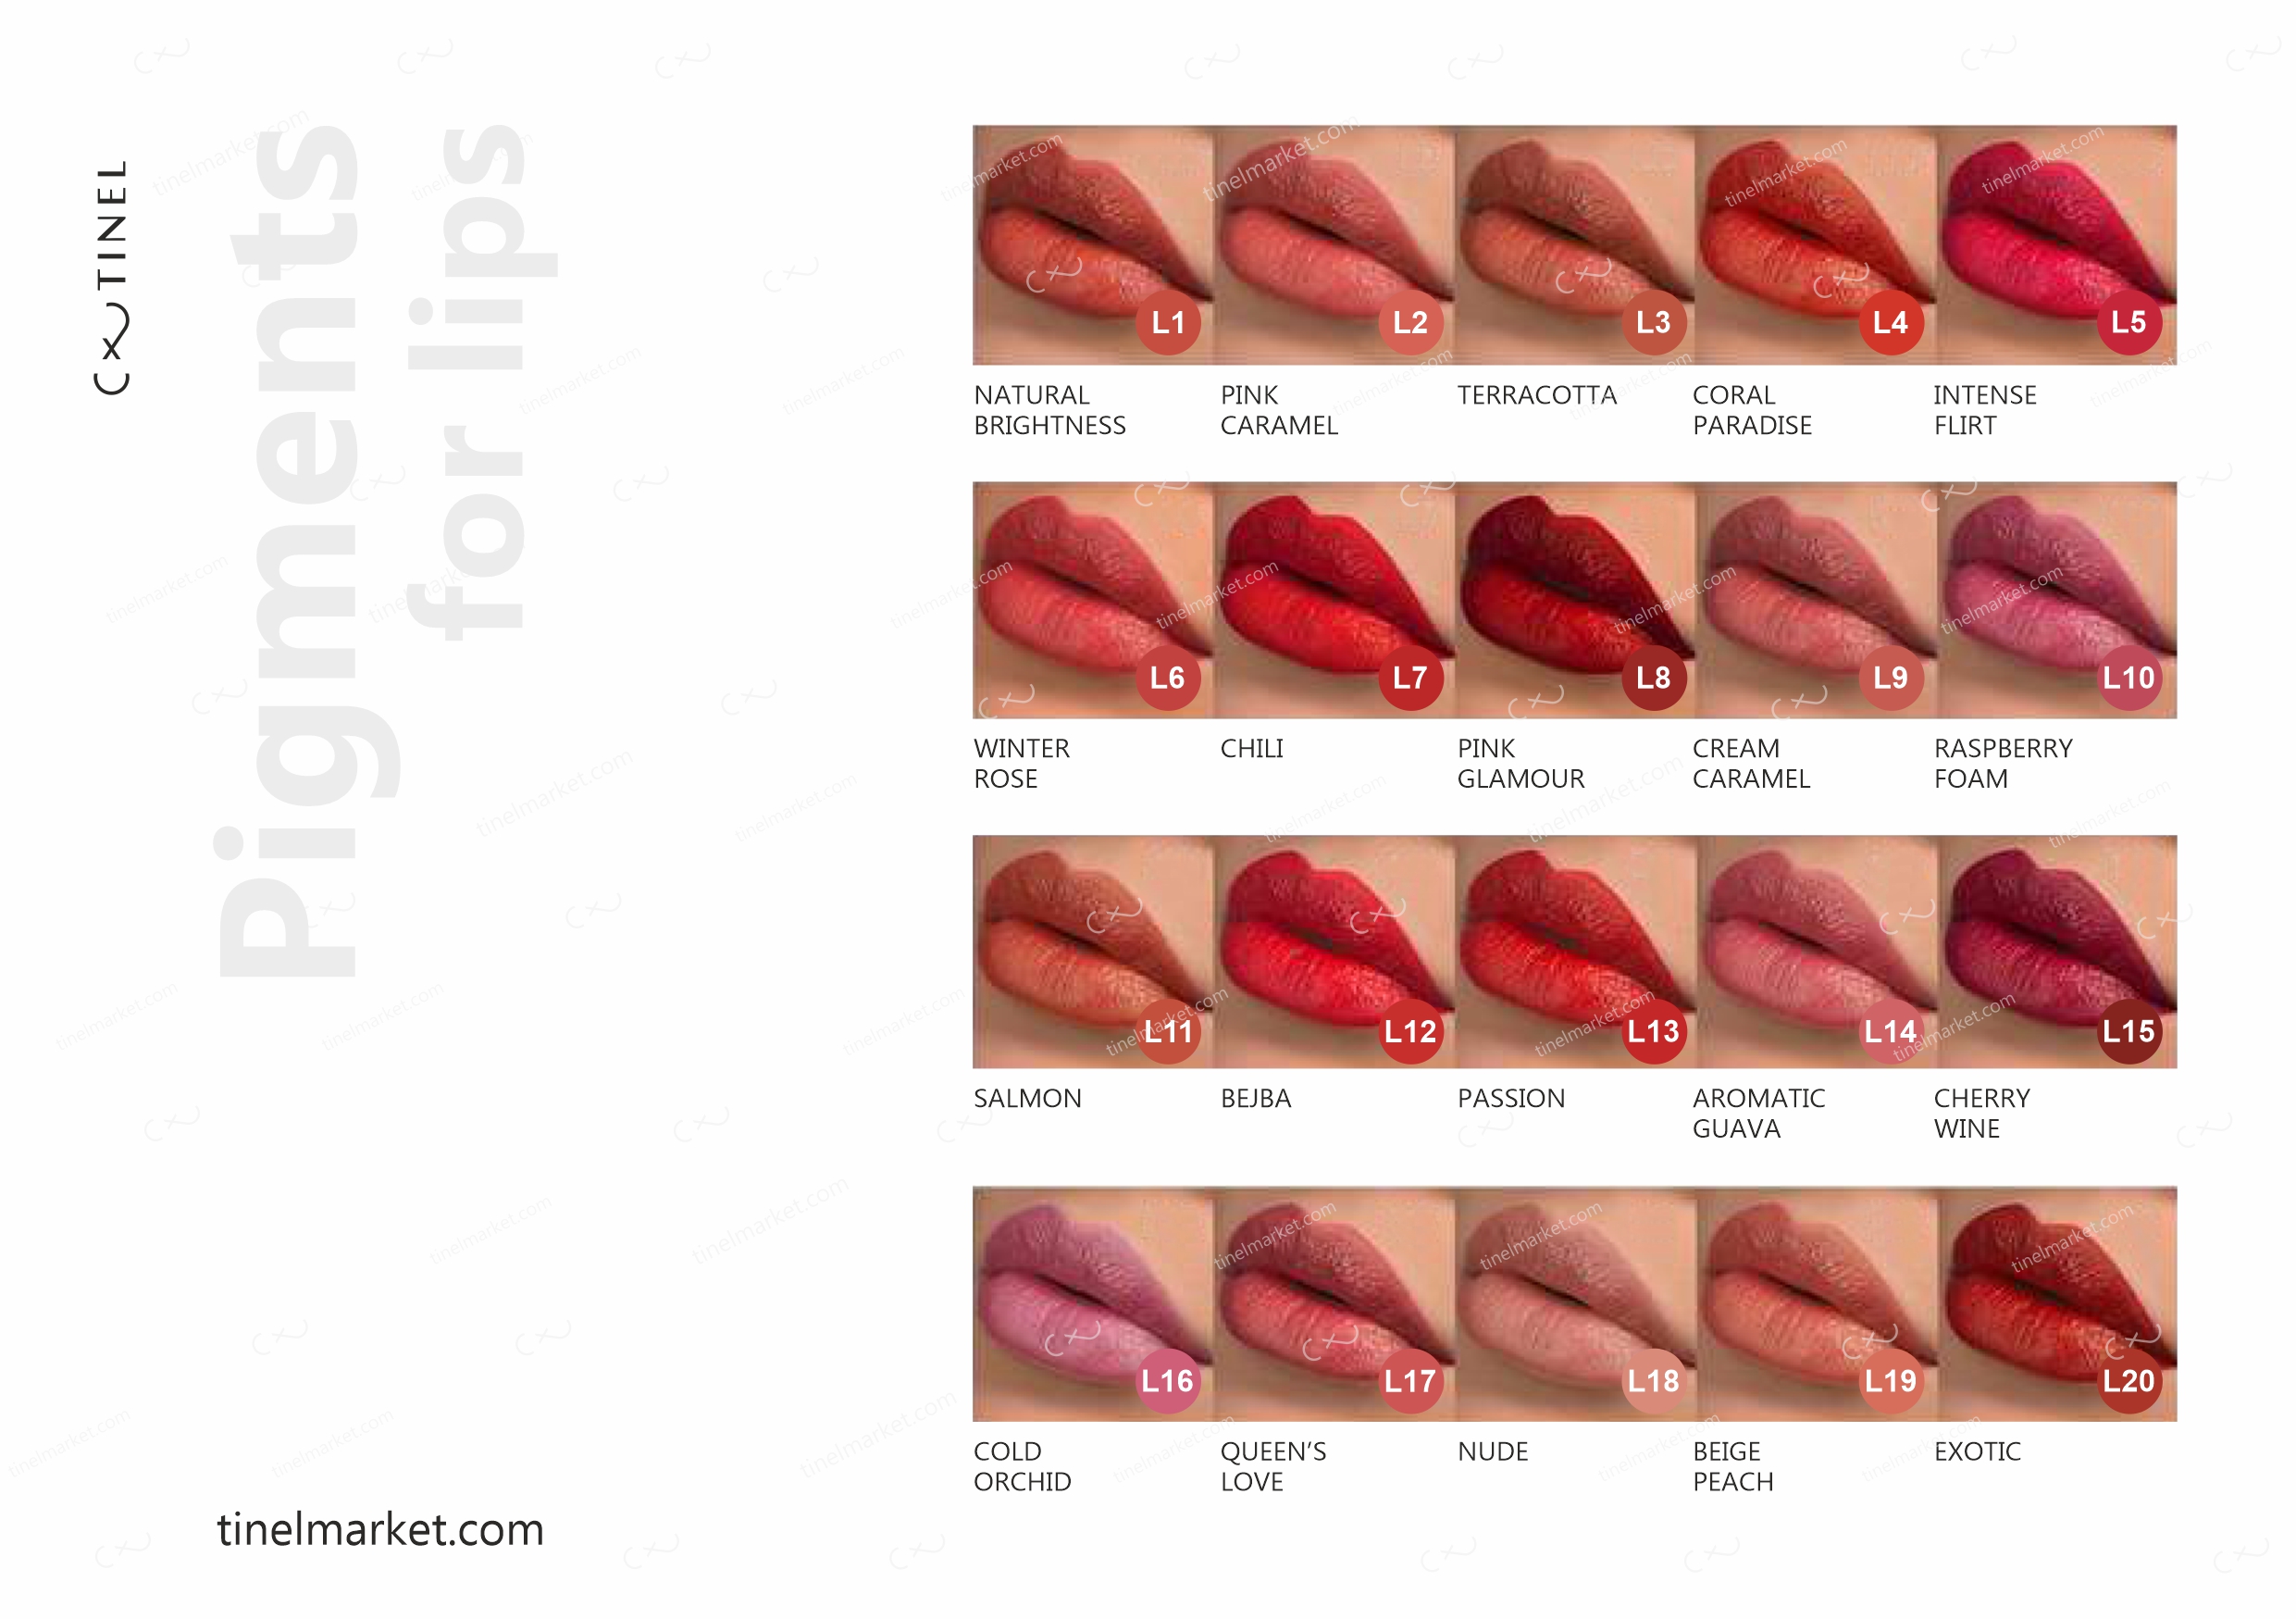 Tinel pigments for lips